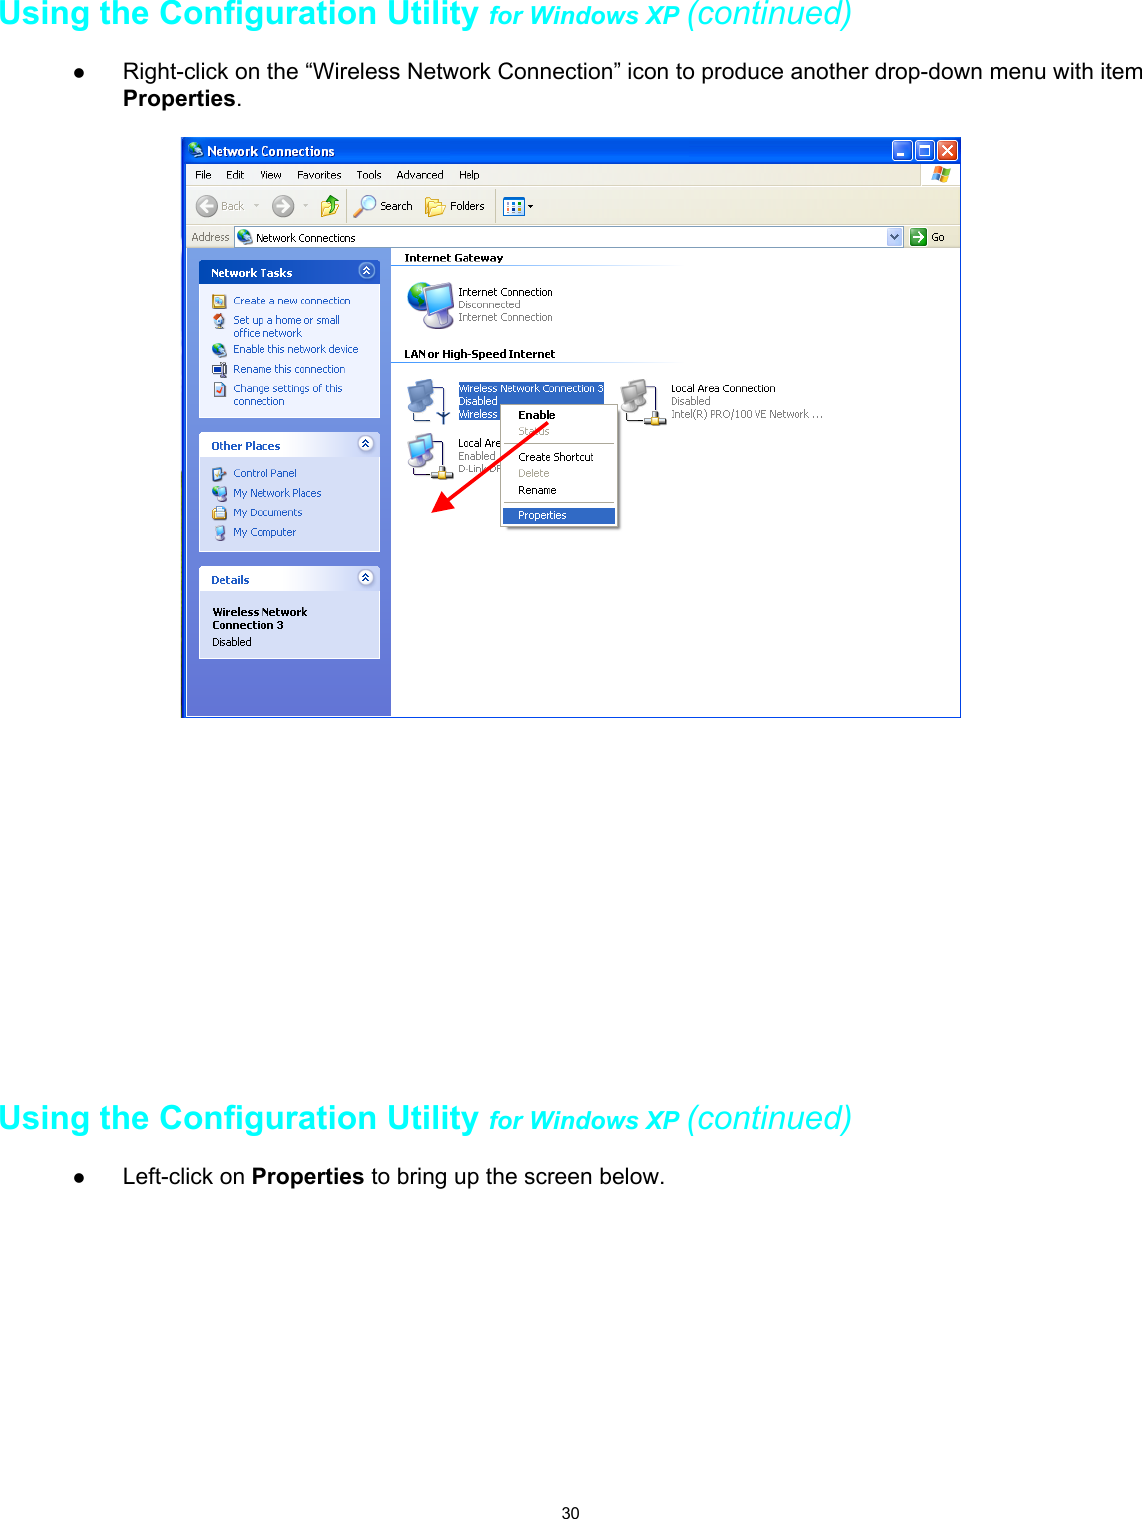 30Using the Configuration Utility for Windows XP (continued)z Right-click on the “Wireless Network Connection” icon to produce another drop-down menu with itemProperties.Using the Configuration Utility for Windows XP (continued)z Left-click on Properties to bring up the screen below.